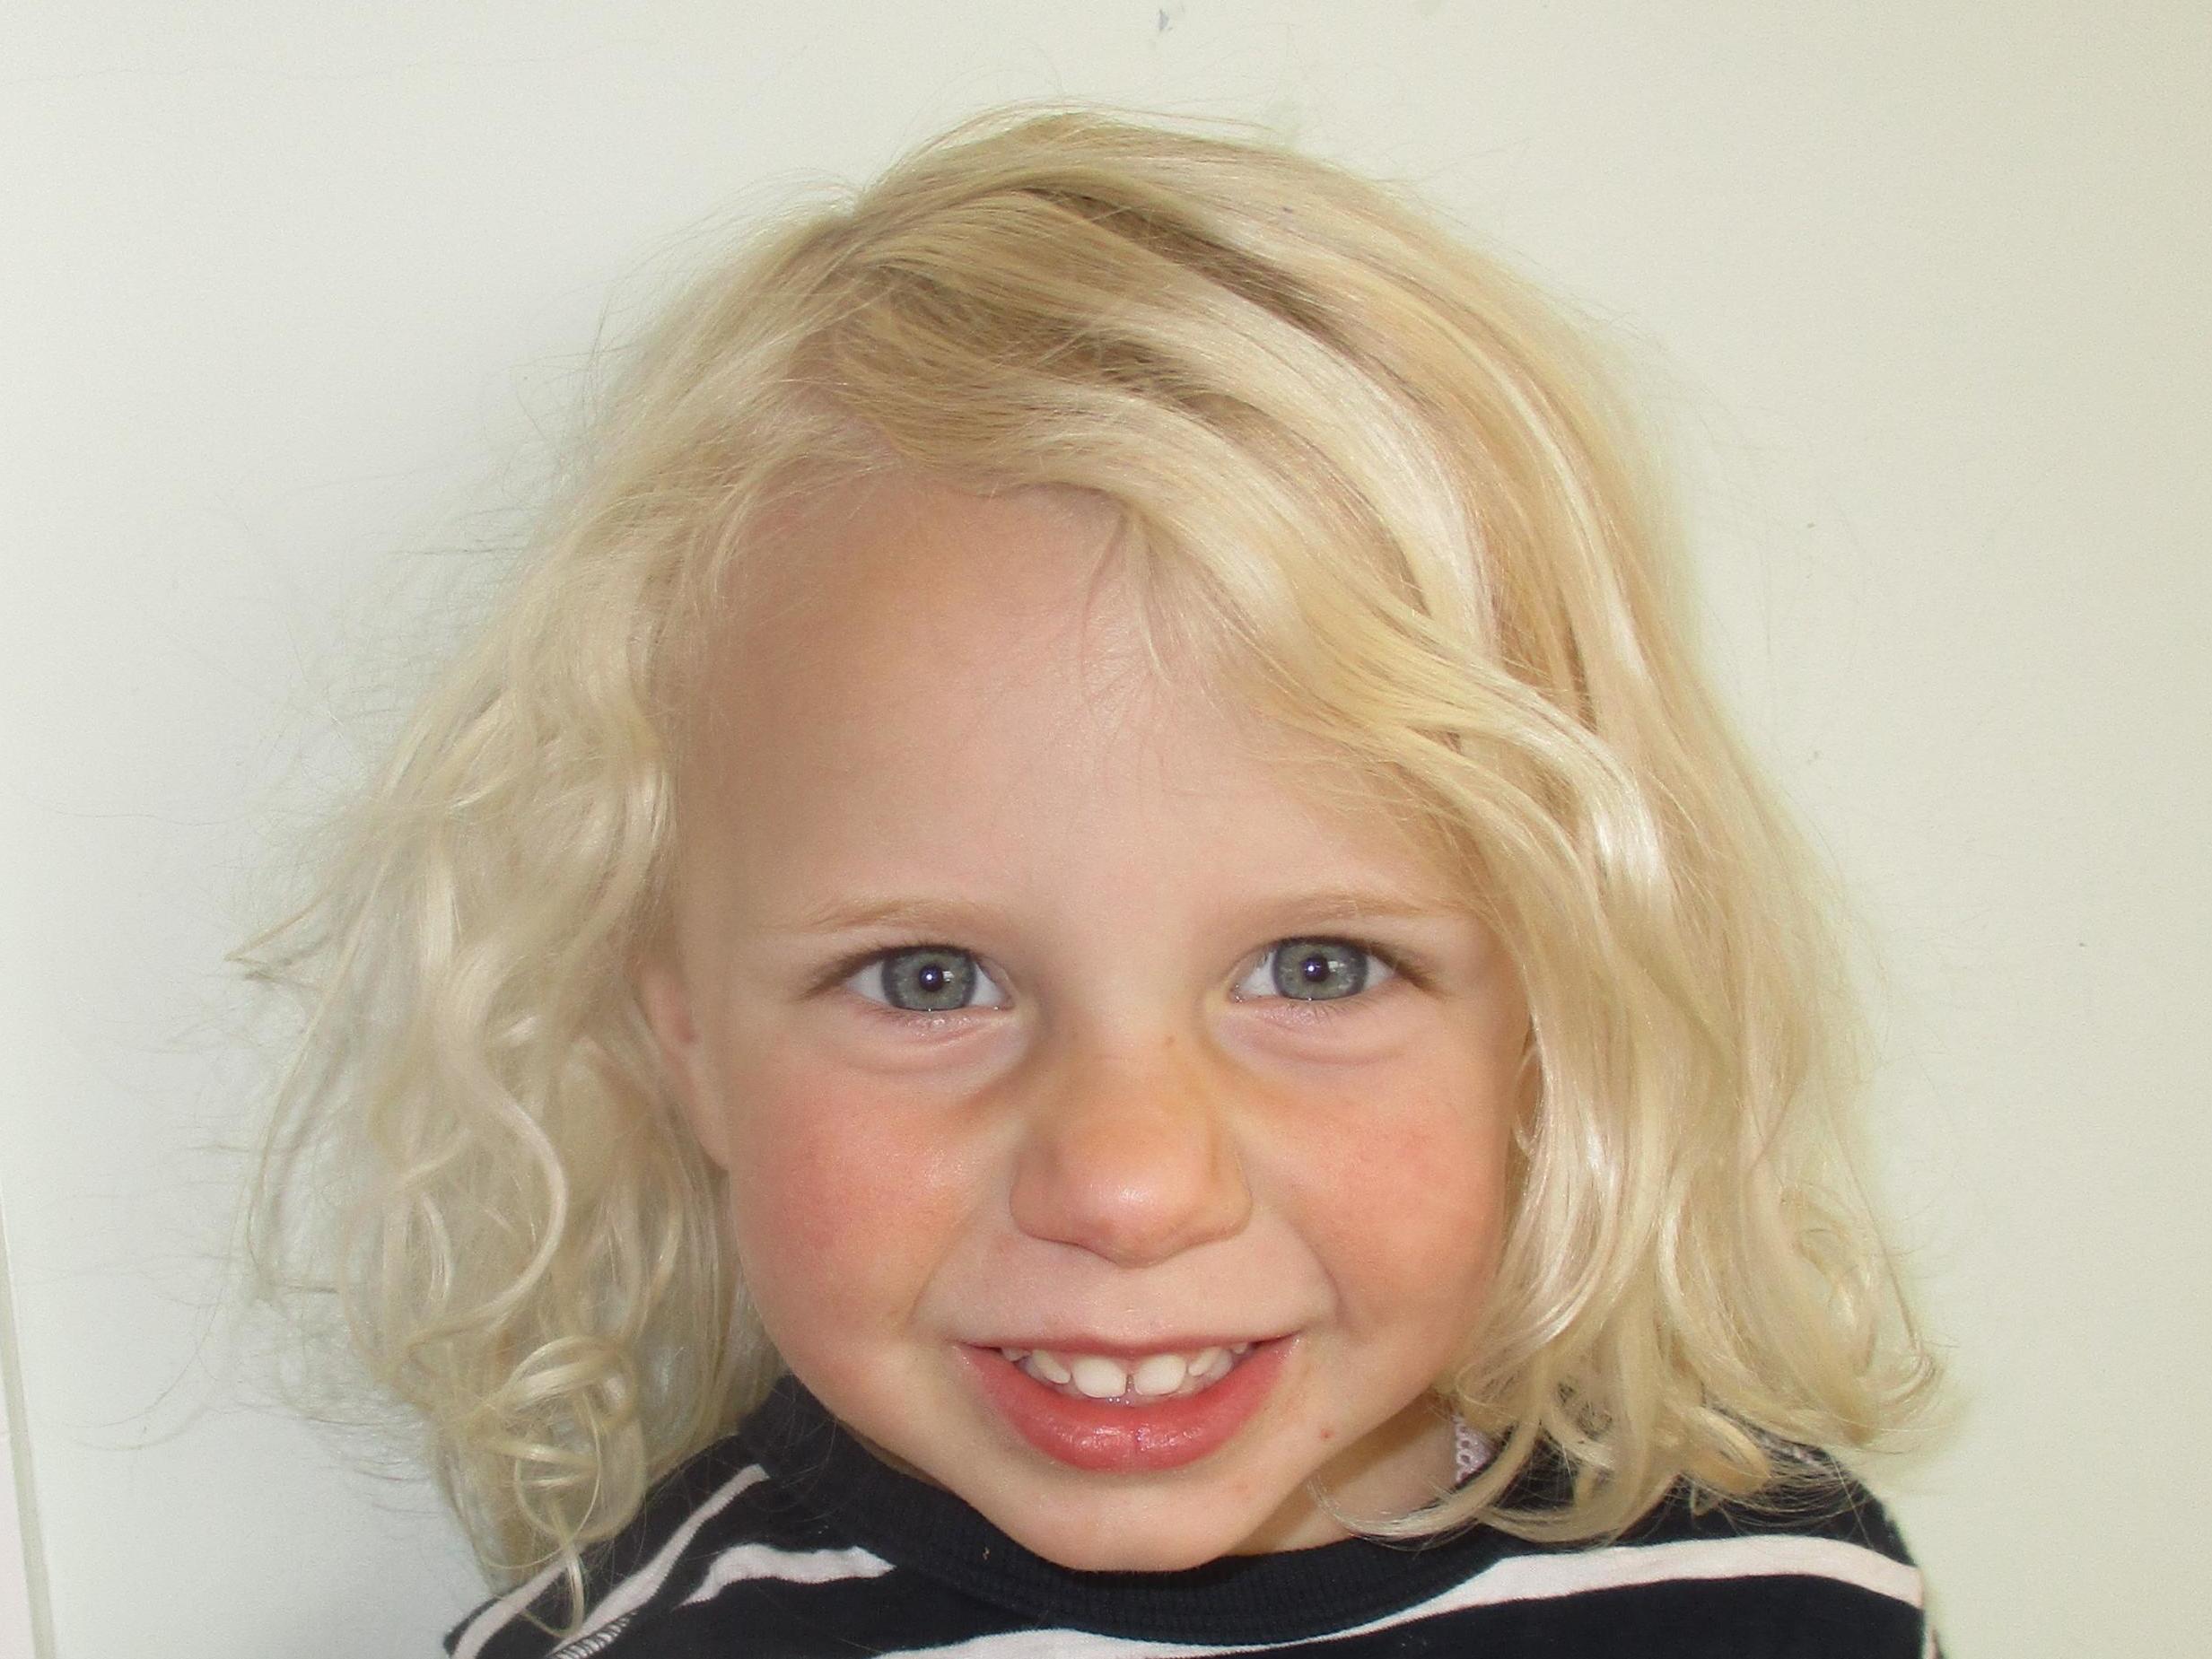 Three-year-old Bethan Colebourn was found dead at her home in Fordingbridge, Hampshire, on 19 October 2017. Her mother Claire Colebourn is on trial at Winchester Crown Court